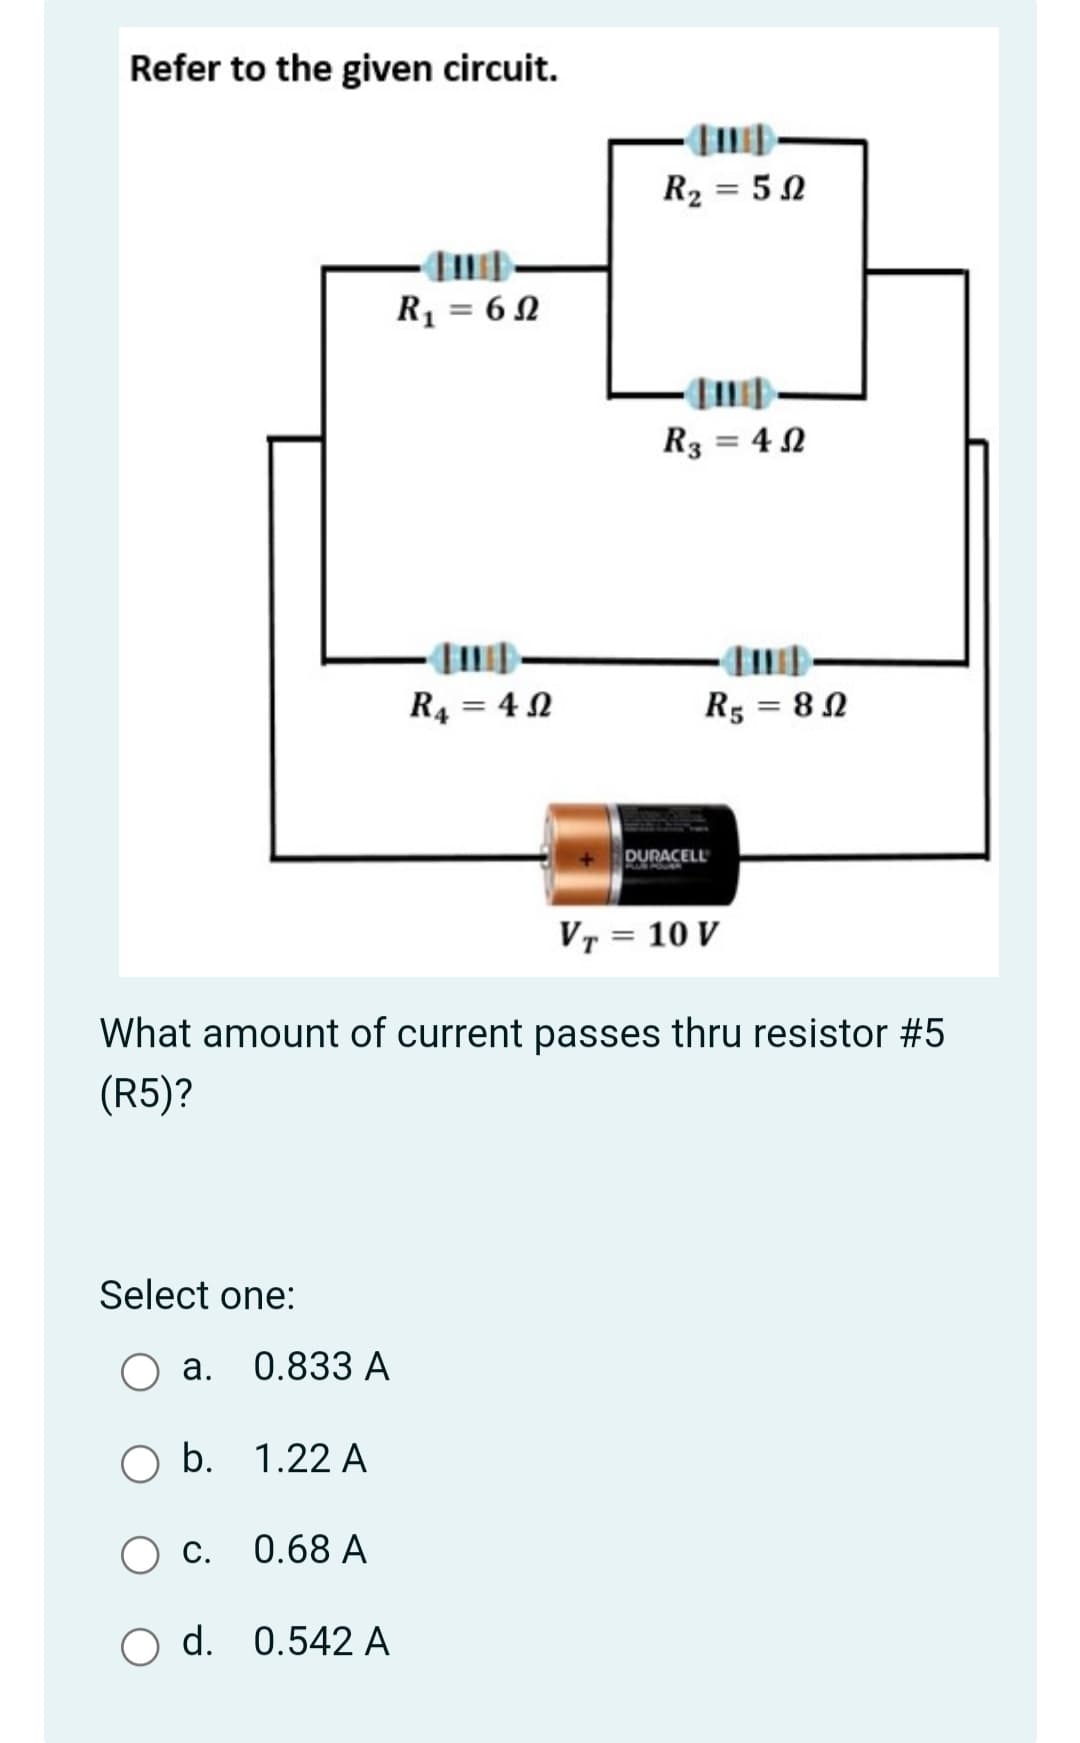 Refer to the given circuit.
R2 = 5 N
R1 = 6 N
R3 = 4 N
R4 = 4 N
R5 = 8N
DURACELL
Vr = 10 V
What amount of current passes thru resistor #5
(R5)?
Select one:
a. 0.833 A
b. 1.22 A
0.68 A
d. 0.542 A
